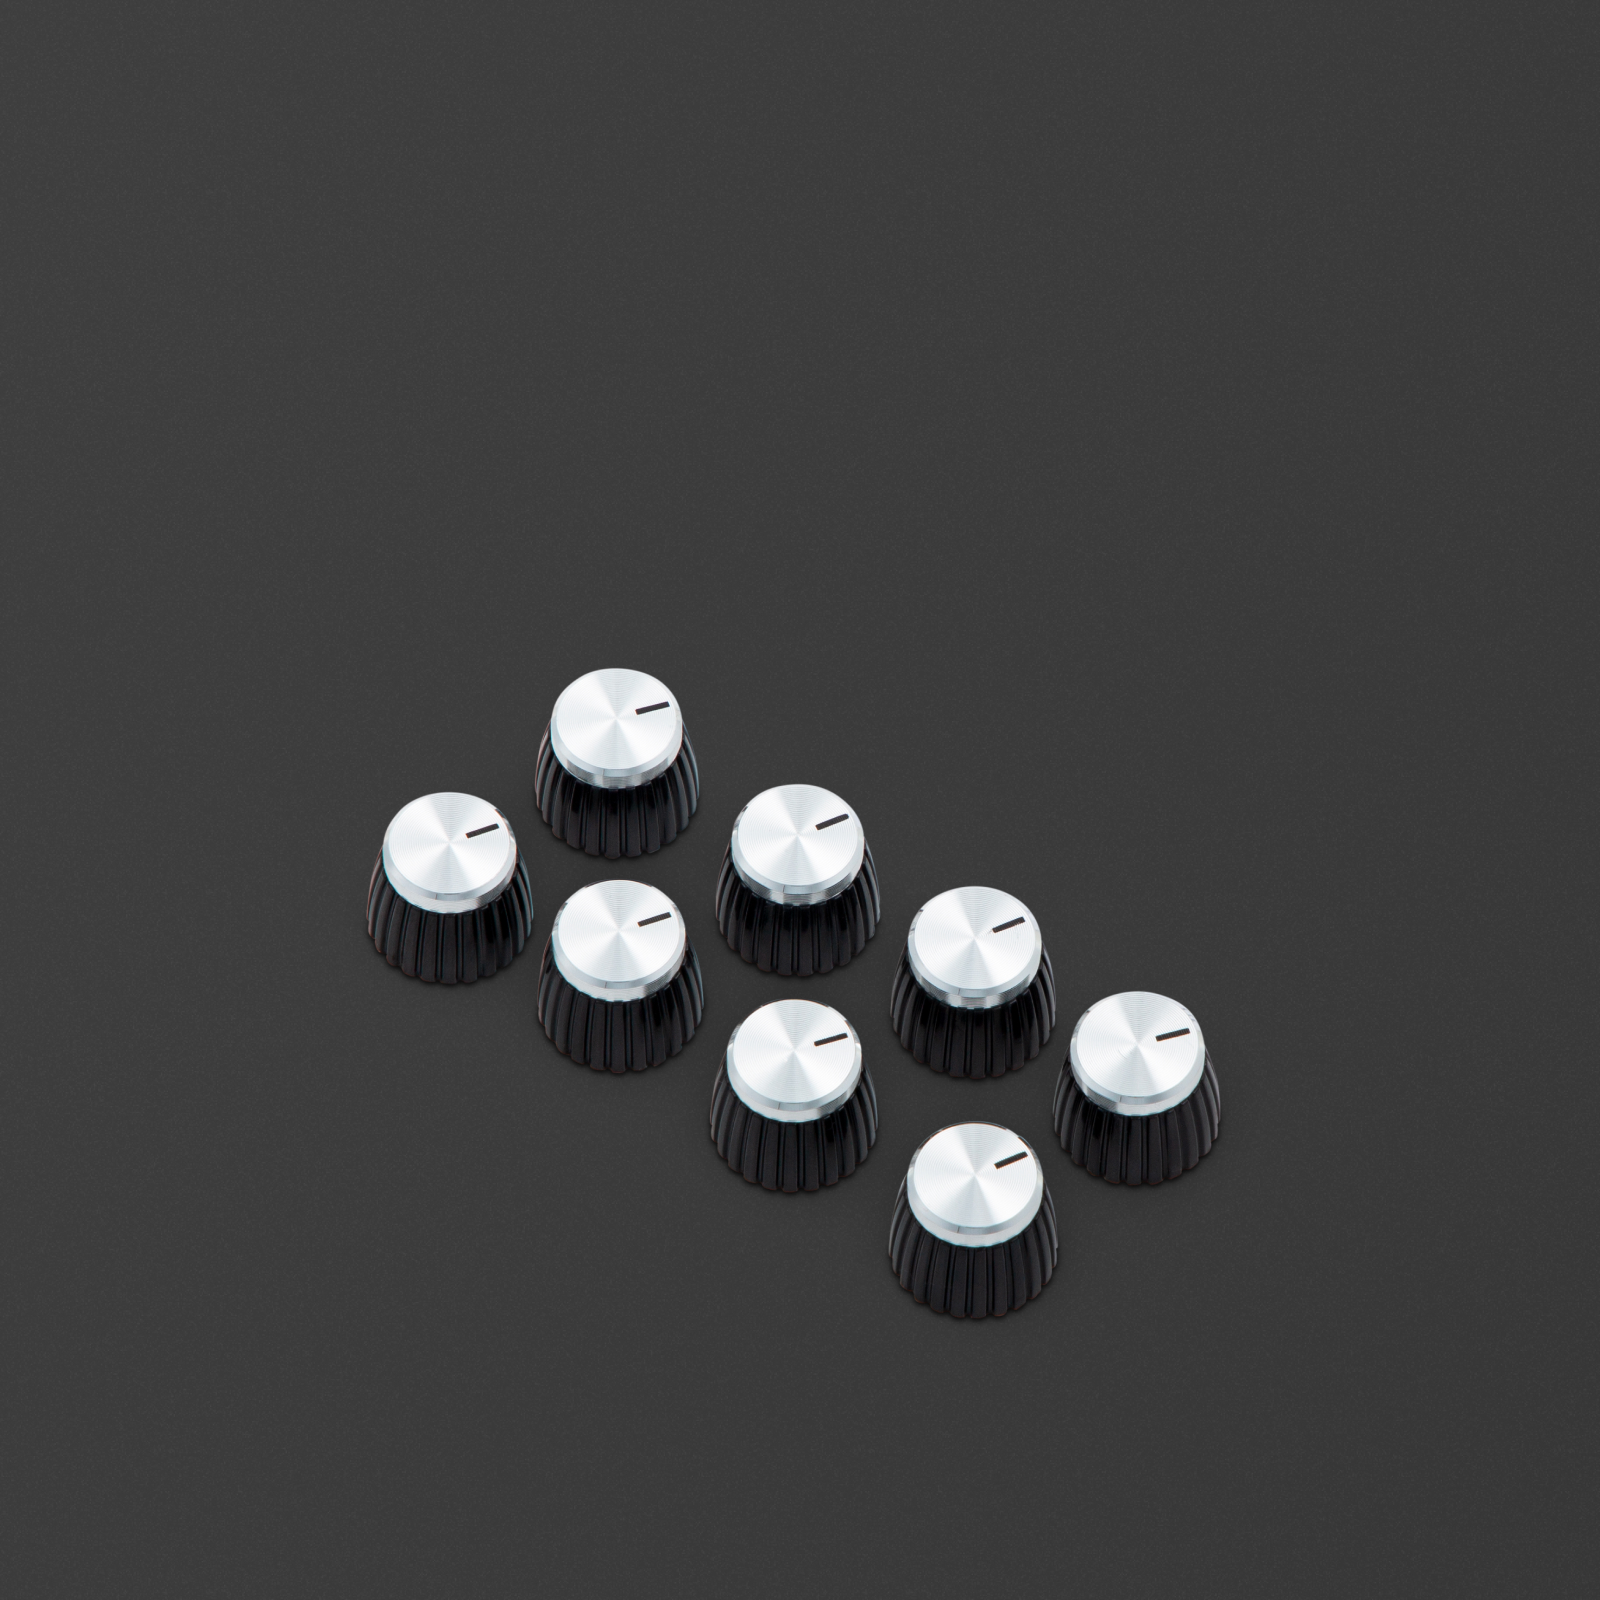 Knobs with a black body, silver cap, and have a D-shaped push-on profile.